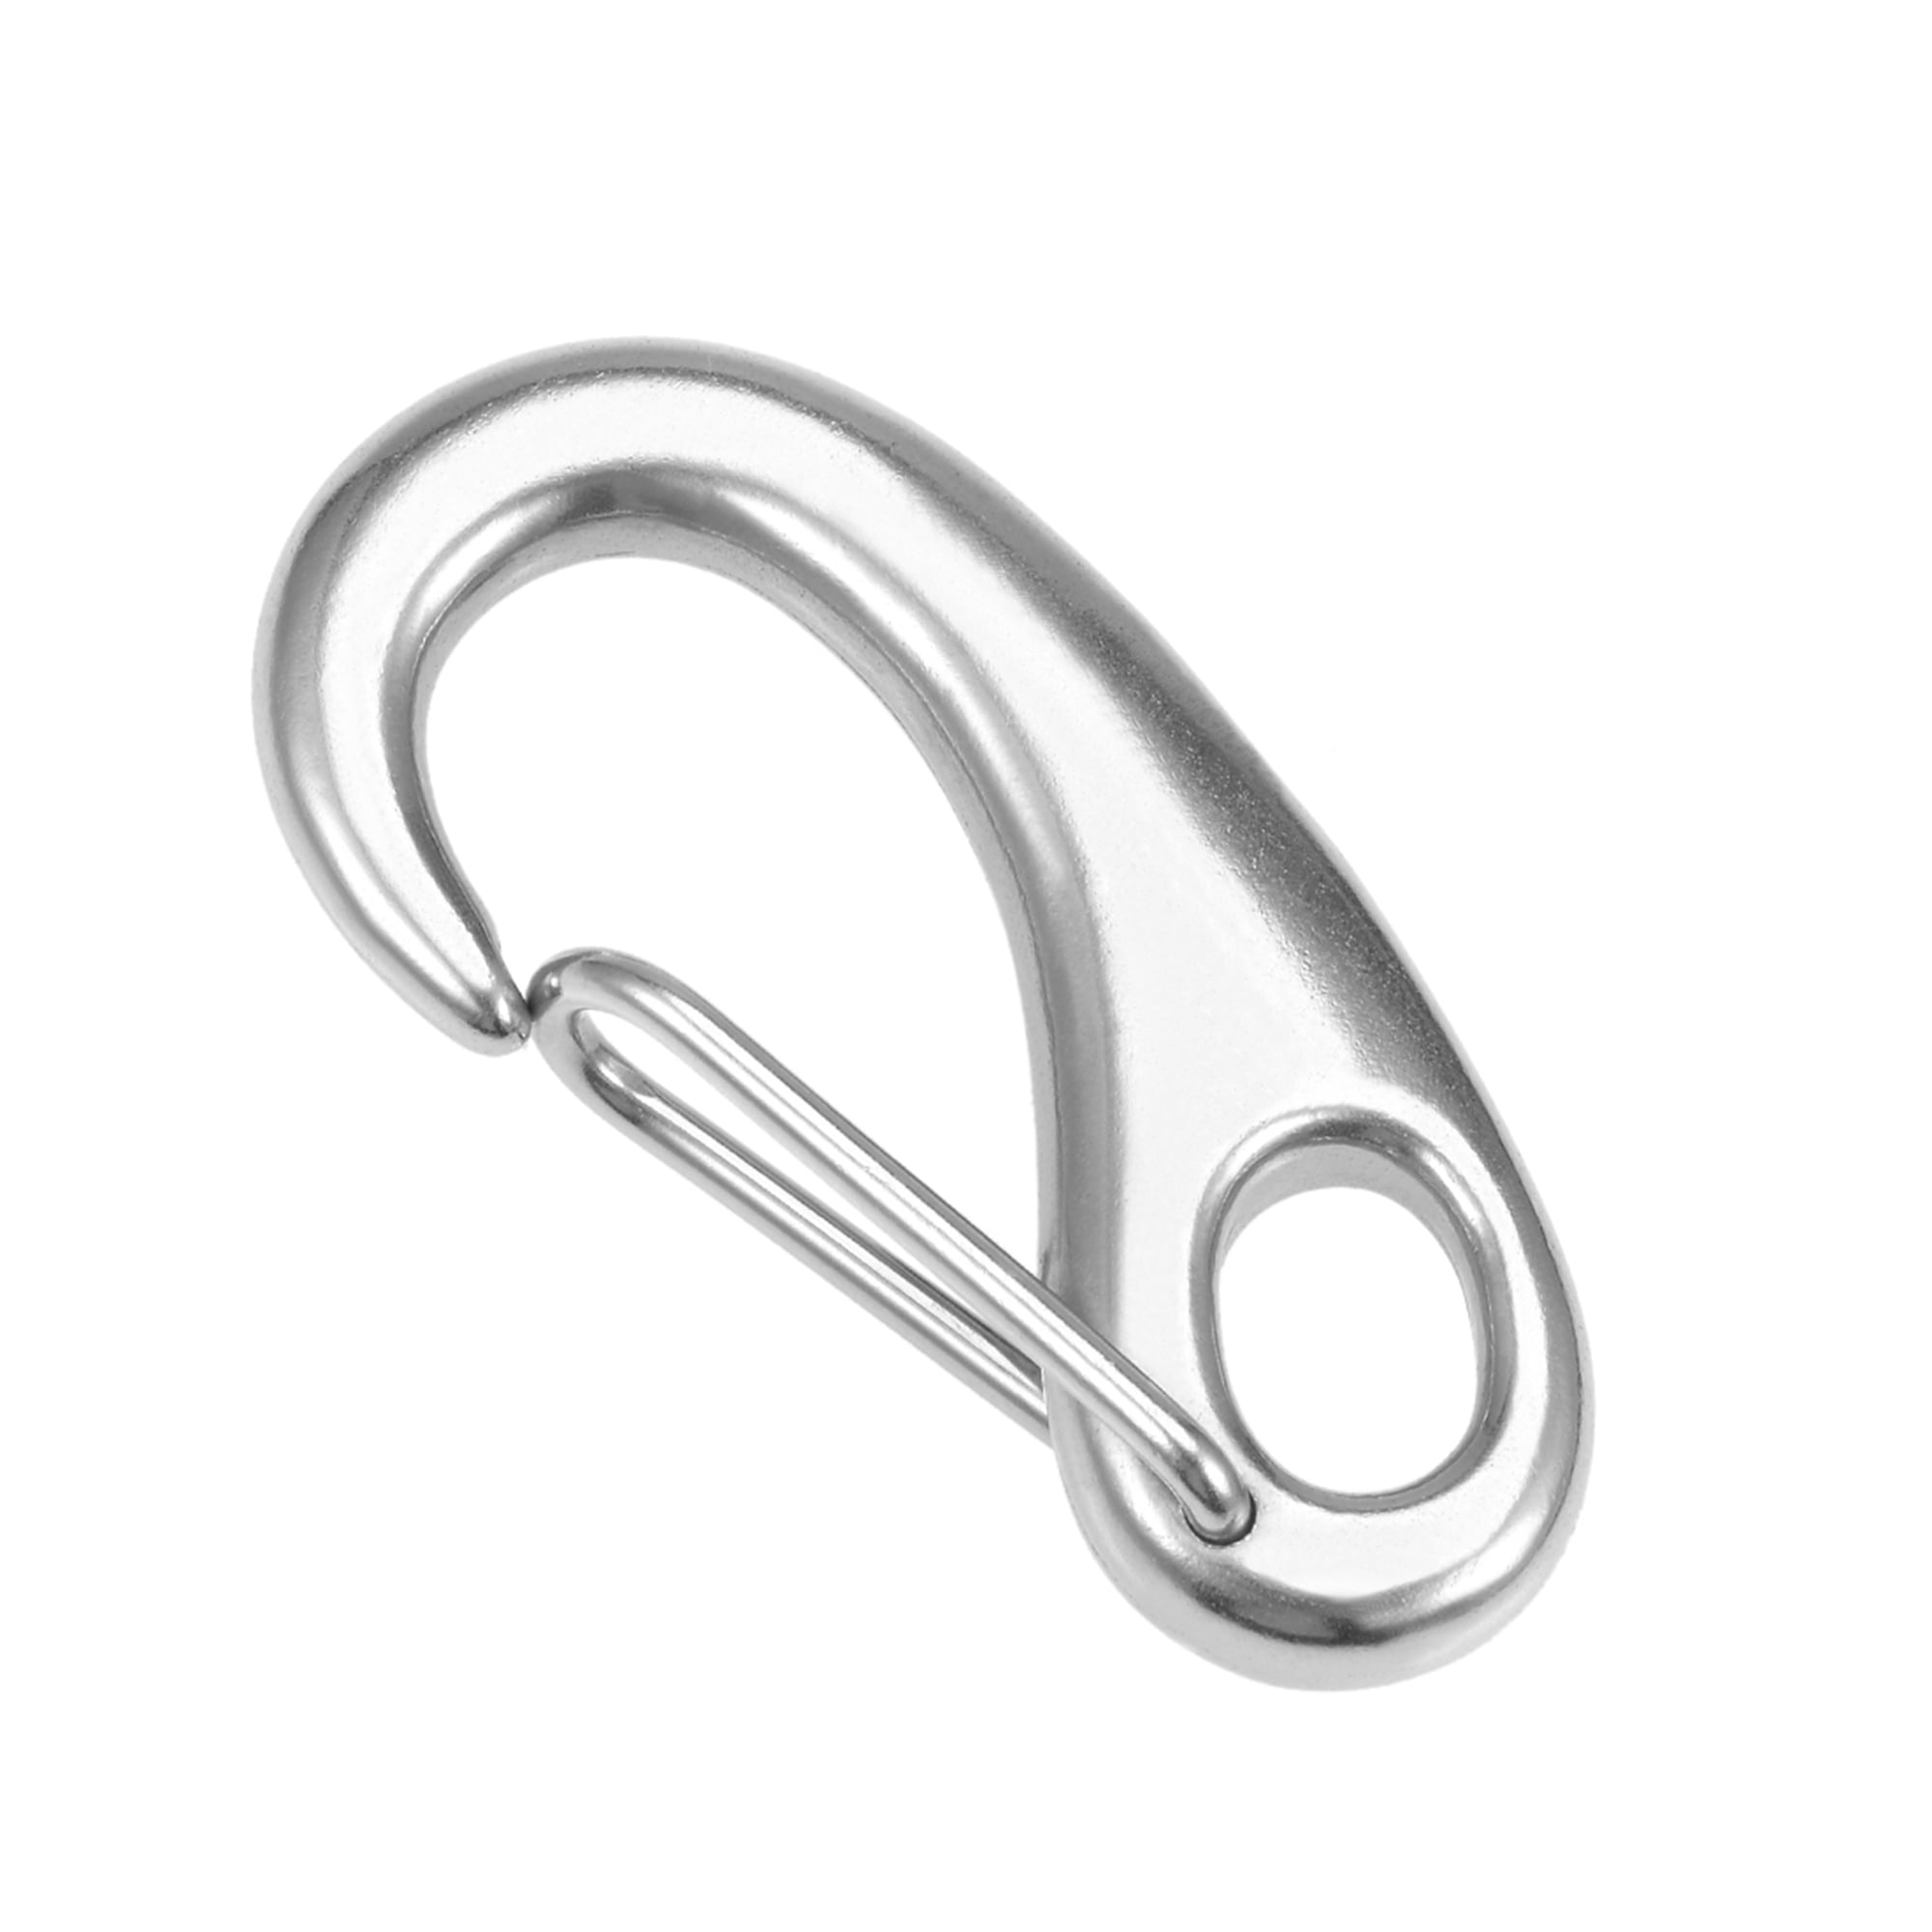 MroMax Carabiner Snap Hook 304 Stainless Steel Spring Gate Snap Hook Clip 70mm/2.76 Length Marine Grade Lobster Claw 1pcs 